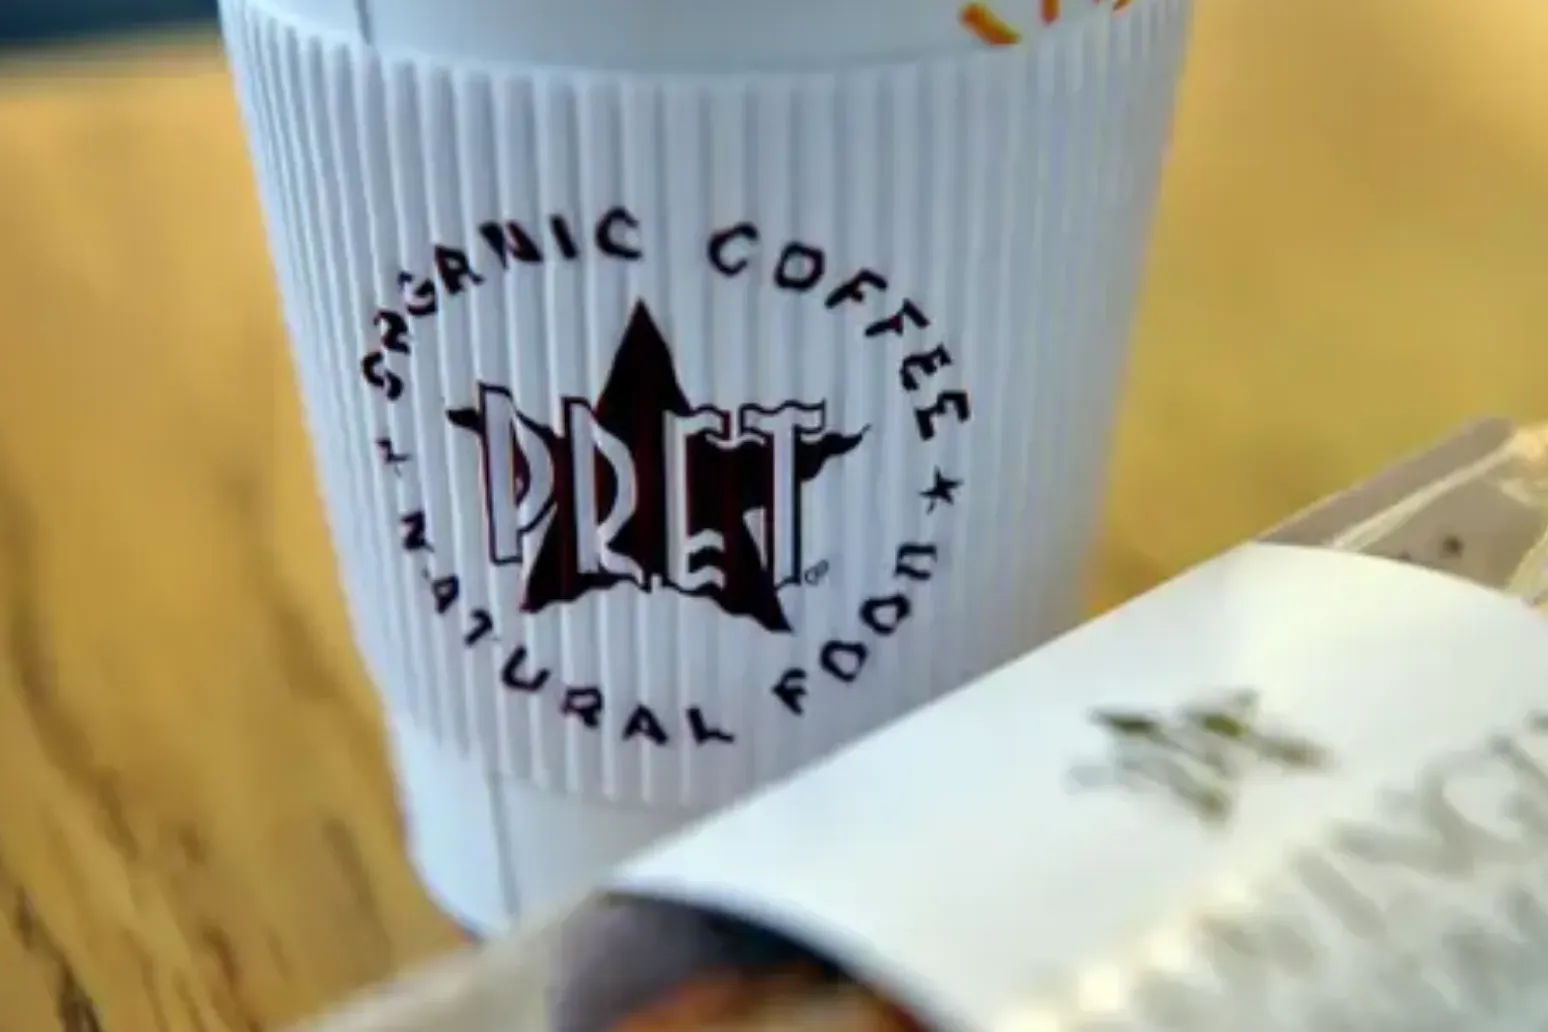 Pret did not check ‘dairy free’ claims made by suppliers, inquest hears 